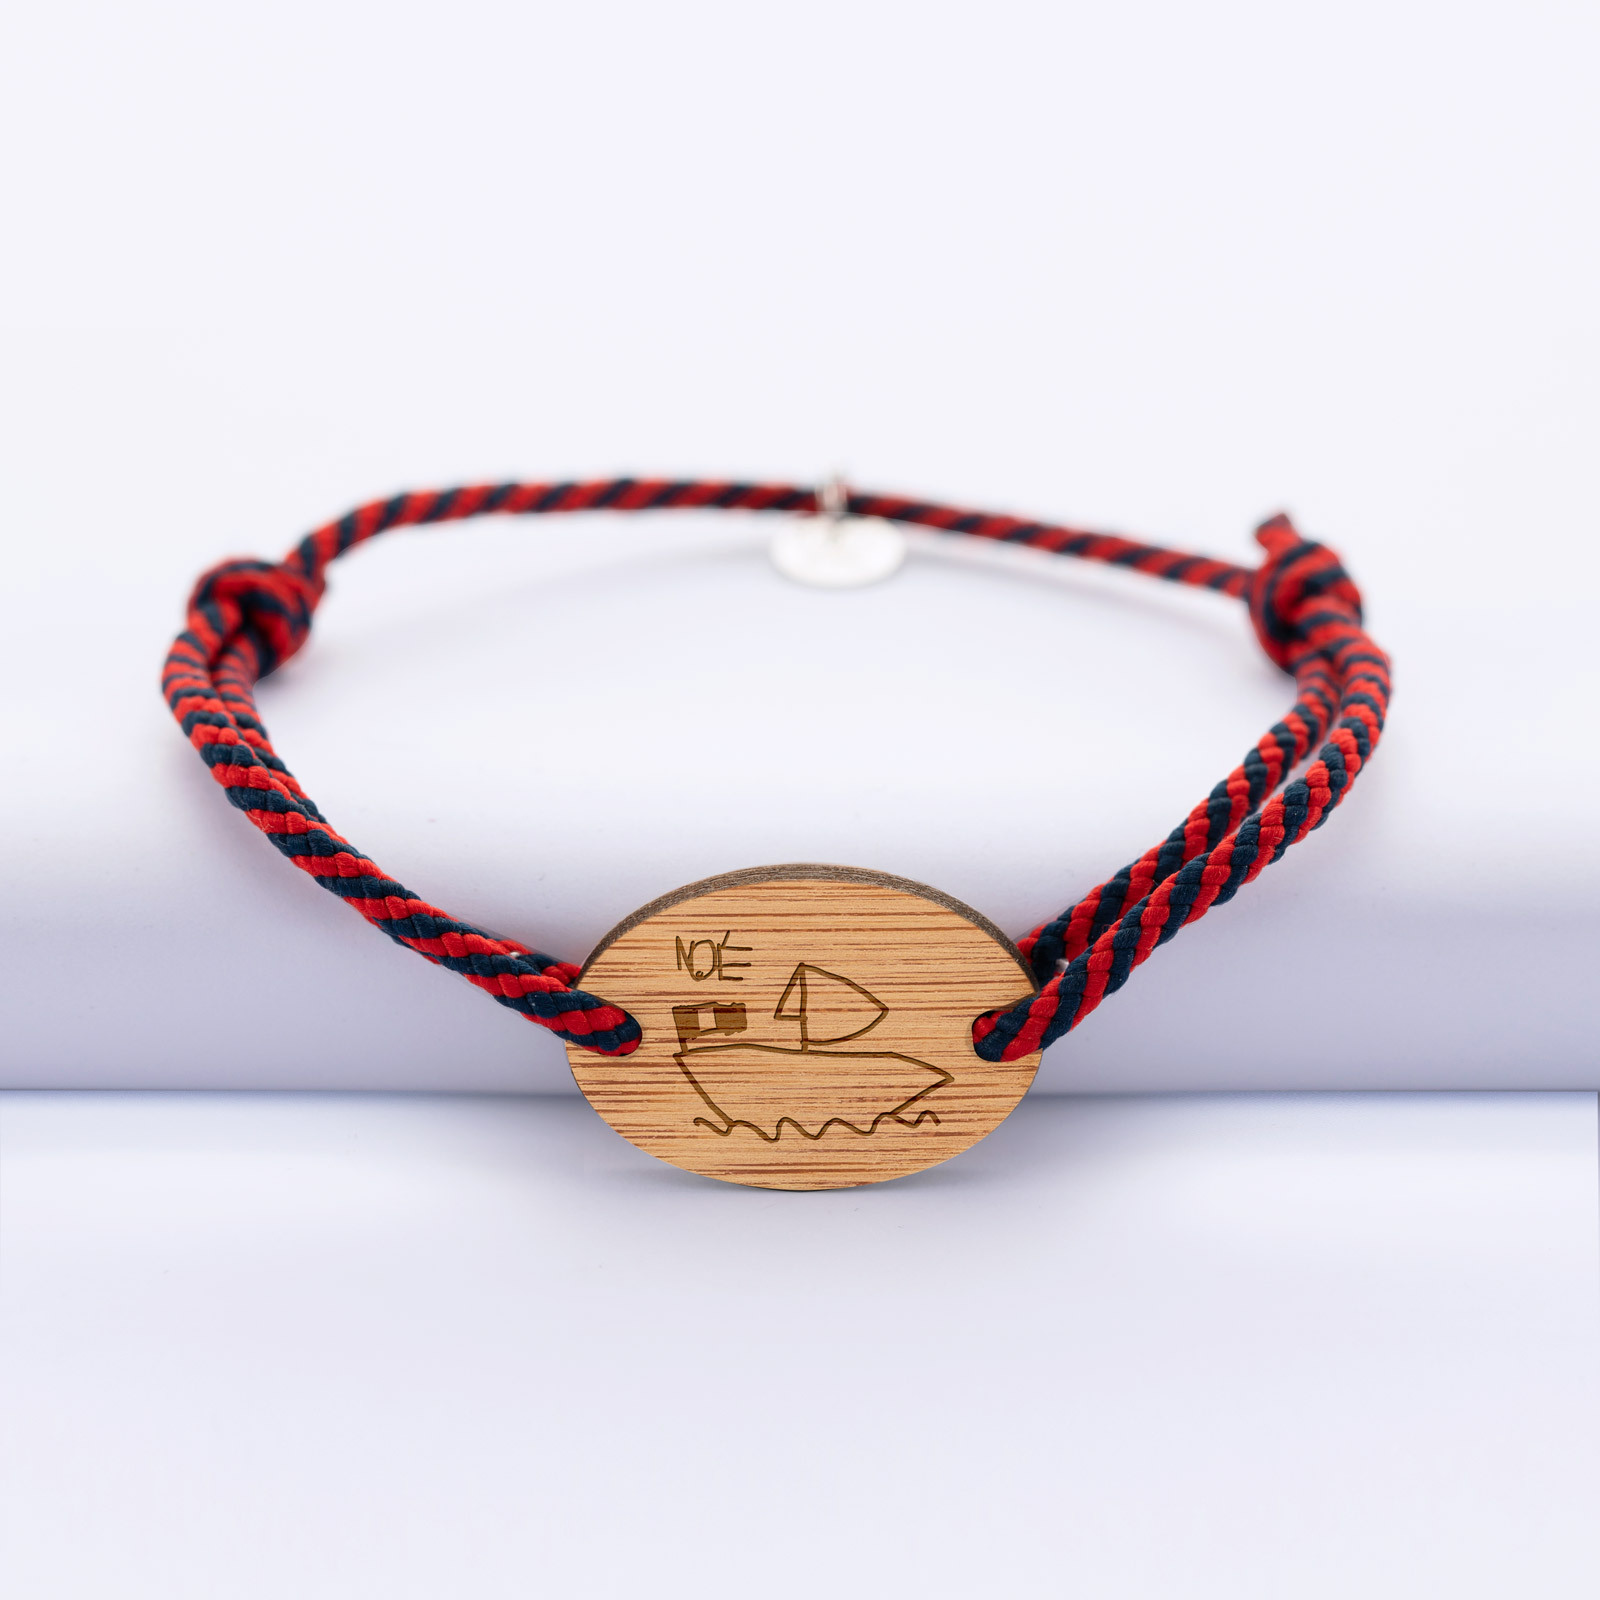 Personalised men's bracelet braided cord engraved 2 holes wooden oval medallion 25x17mm